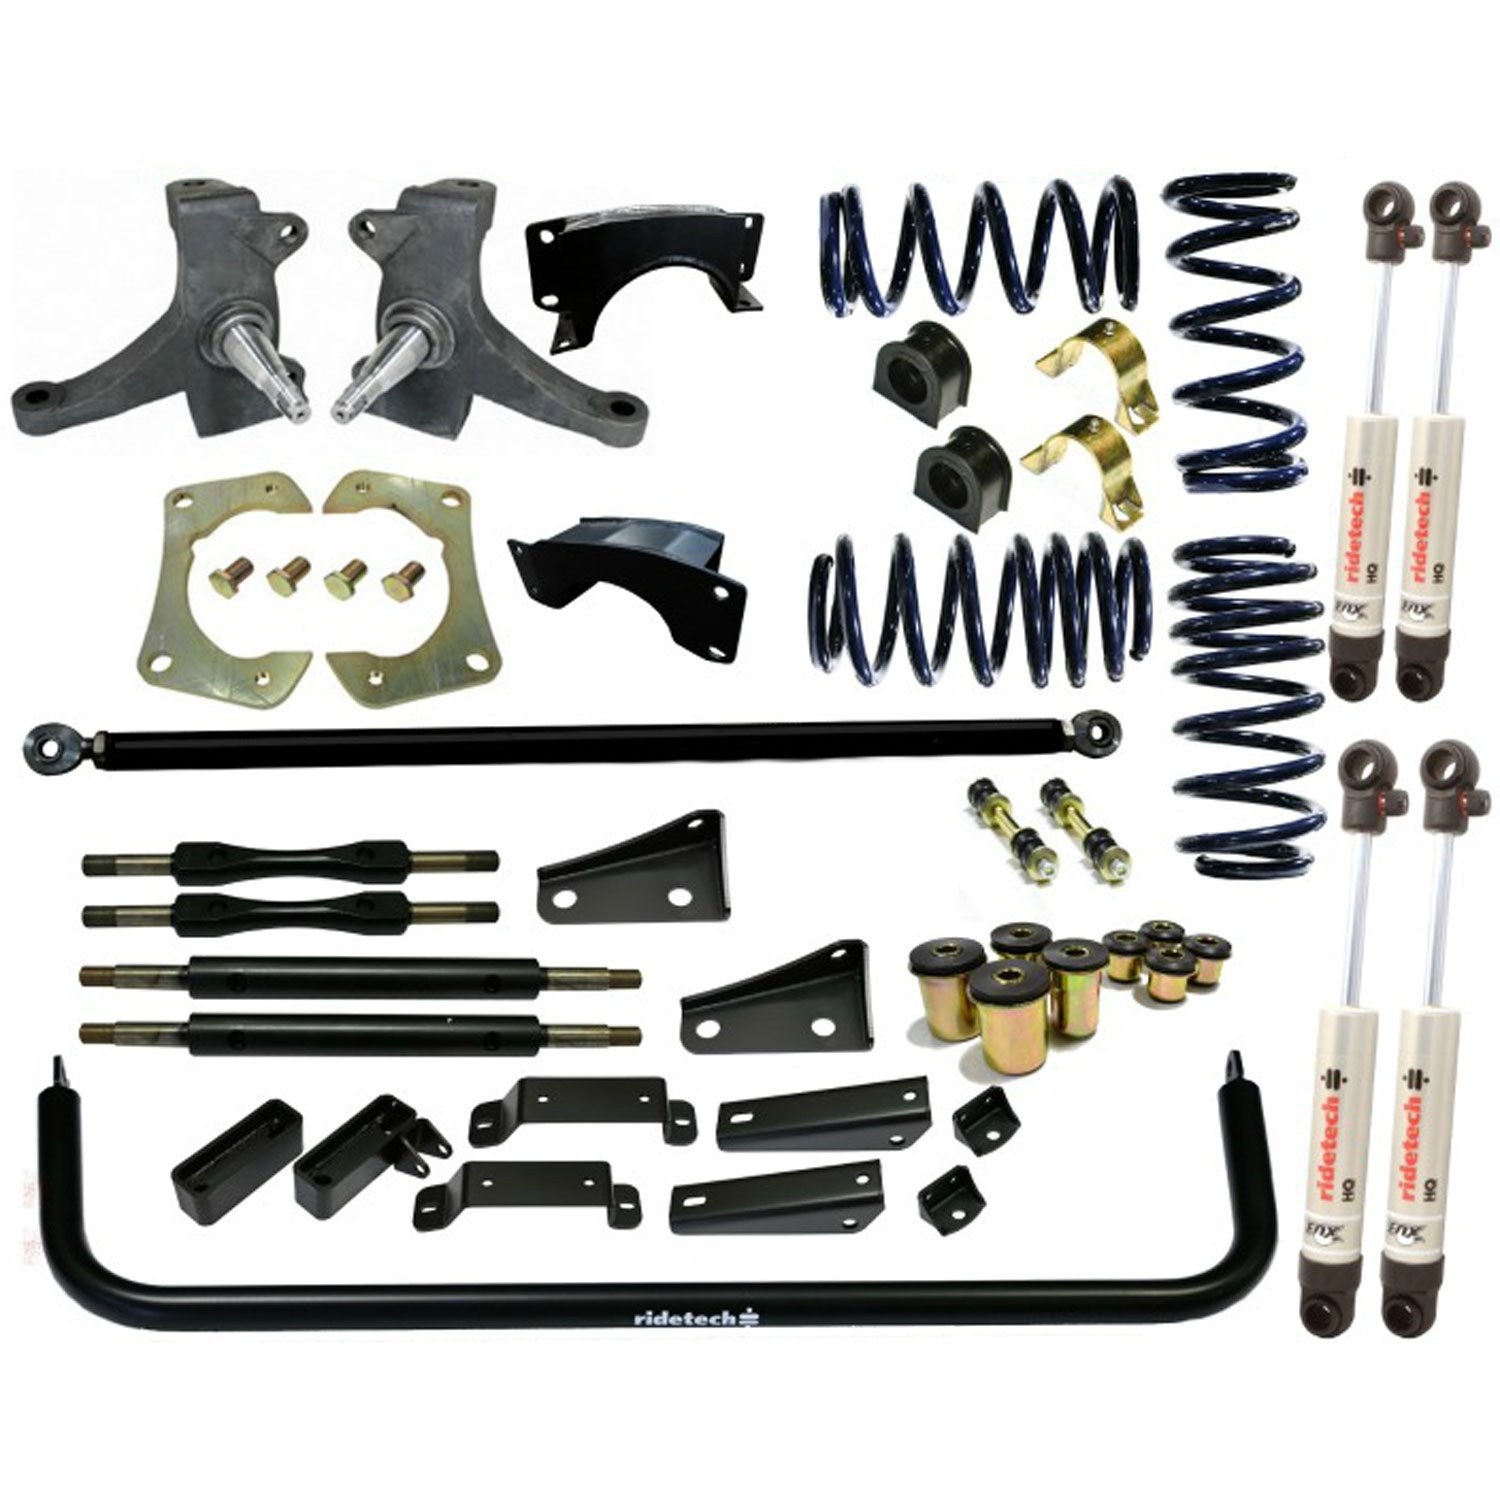 StreetGrip Suspension System for 1971-1972 GM 2WD Trucks w/Small Block, GM LS Engines (Includes Control Arm Bushing Kit)